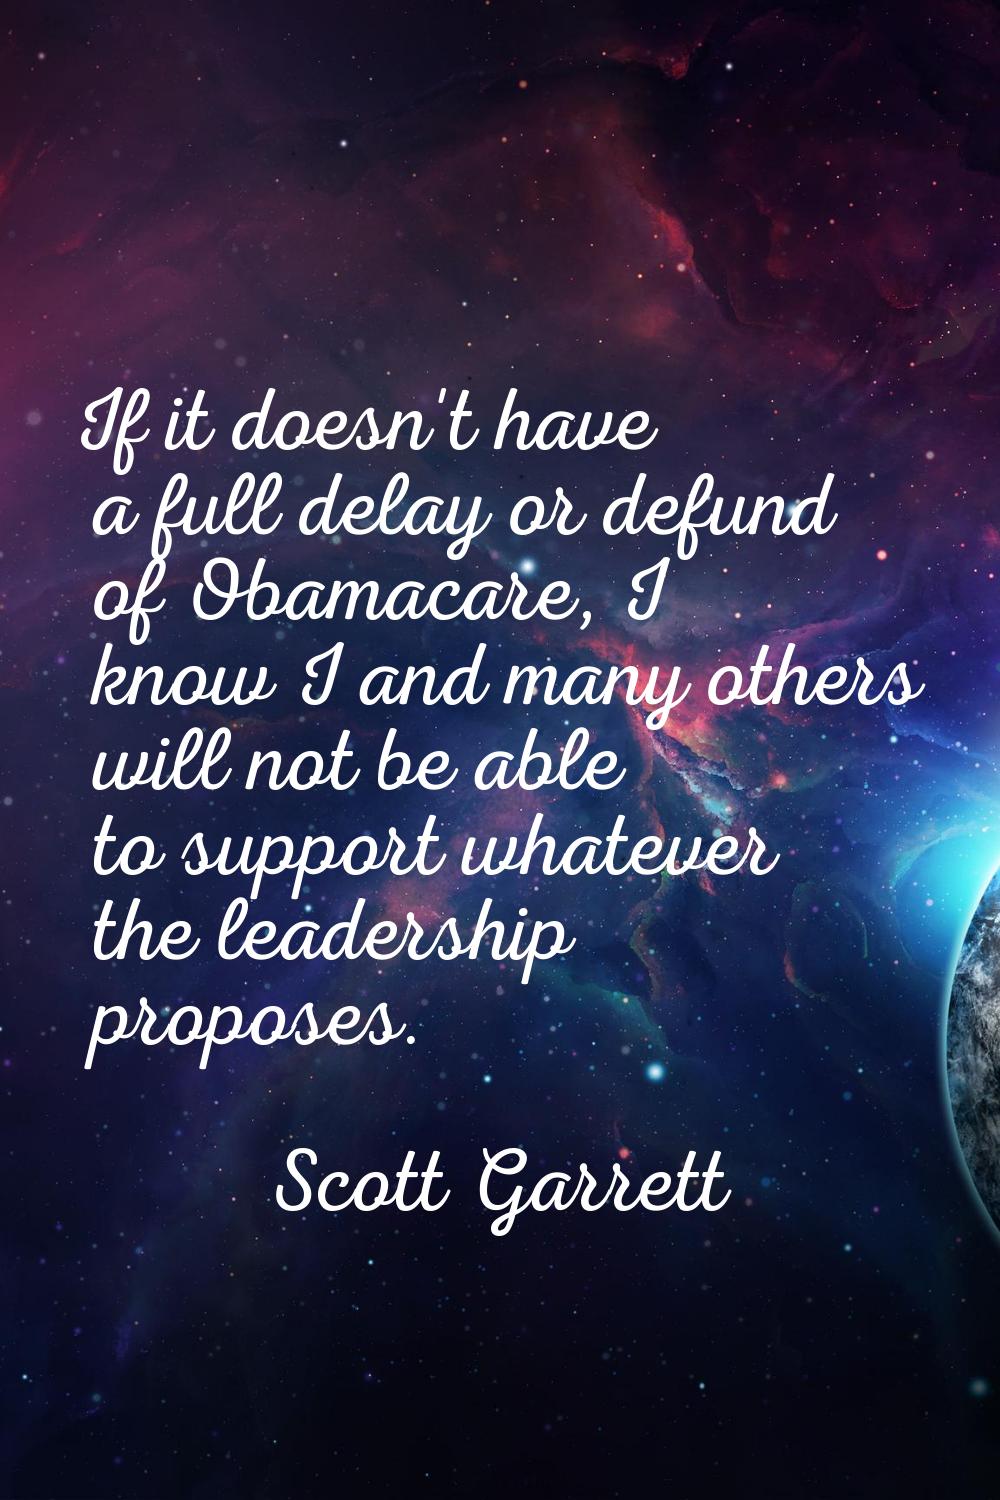 If it doesn't have a full delay or defund of Obamacare, I know I and many others will not be able t